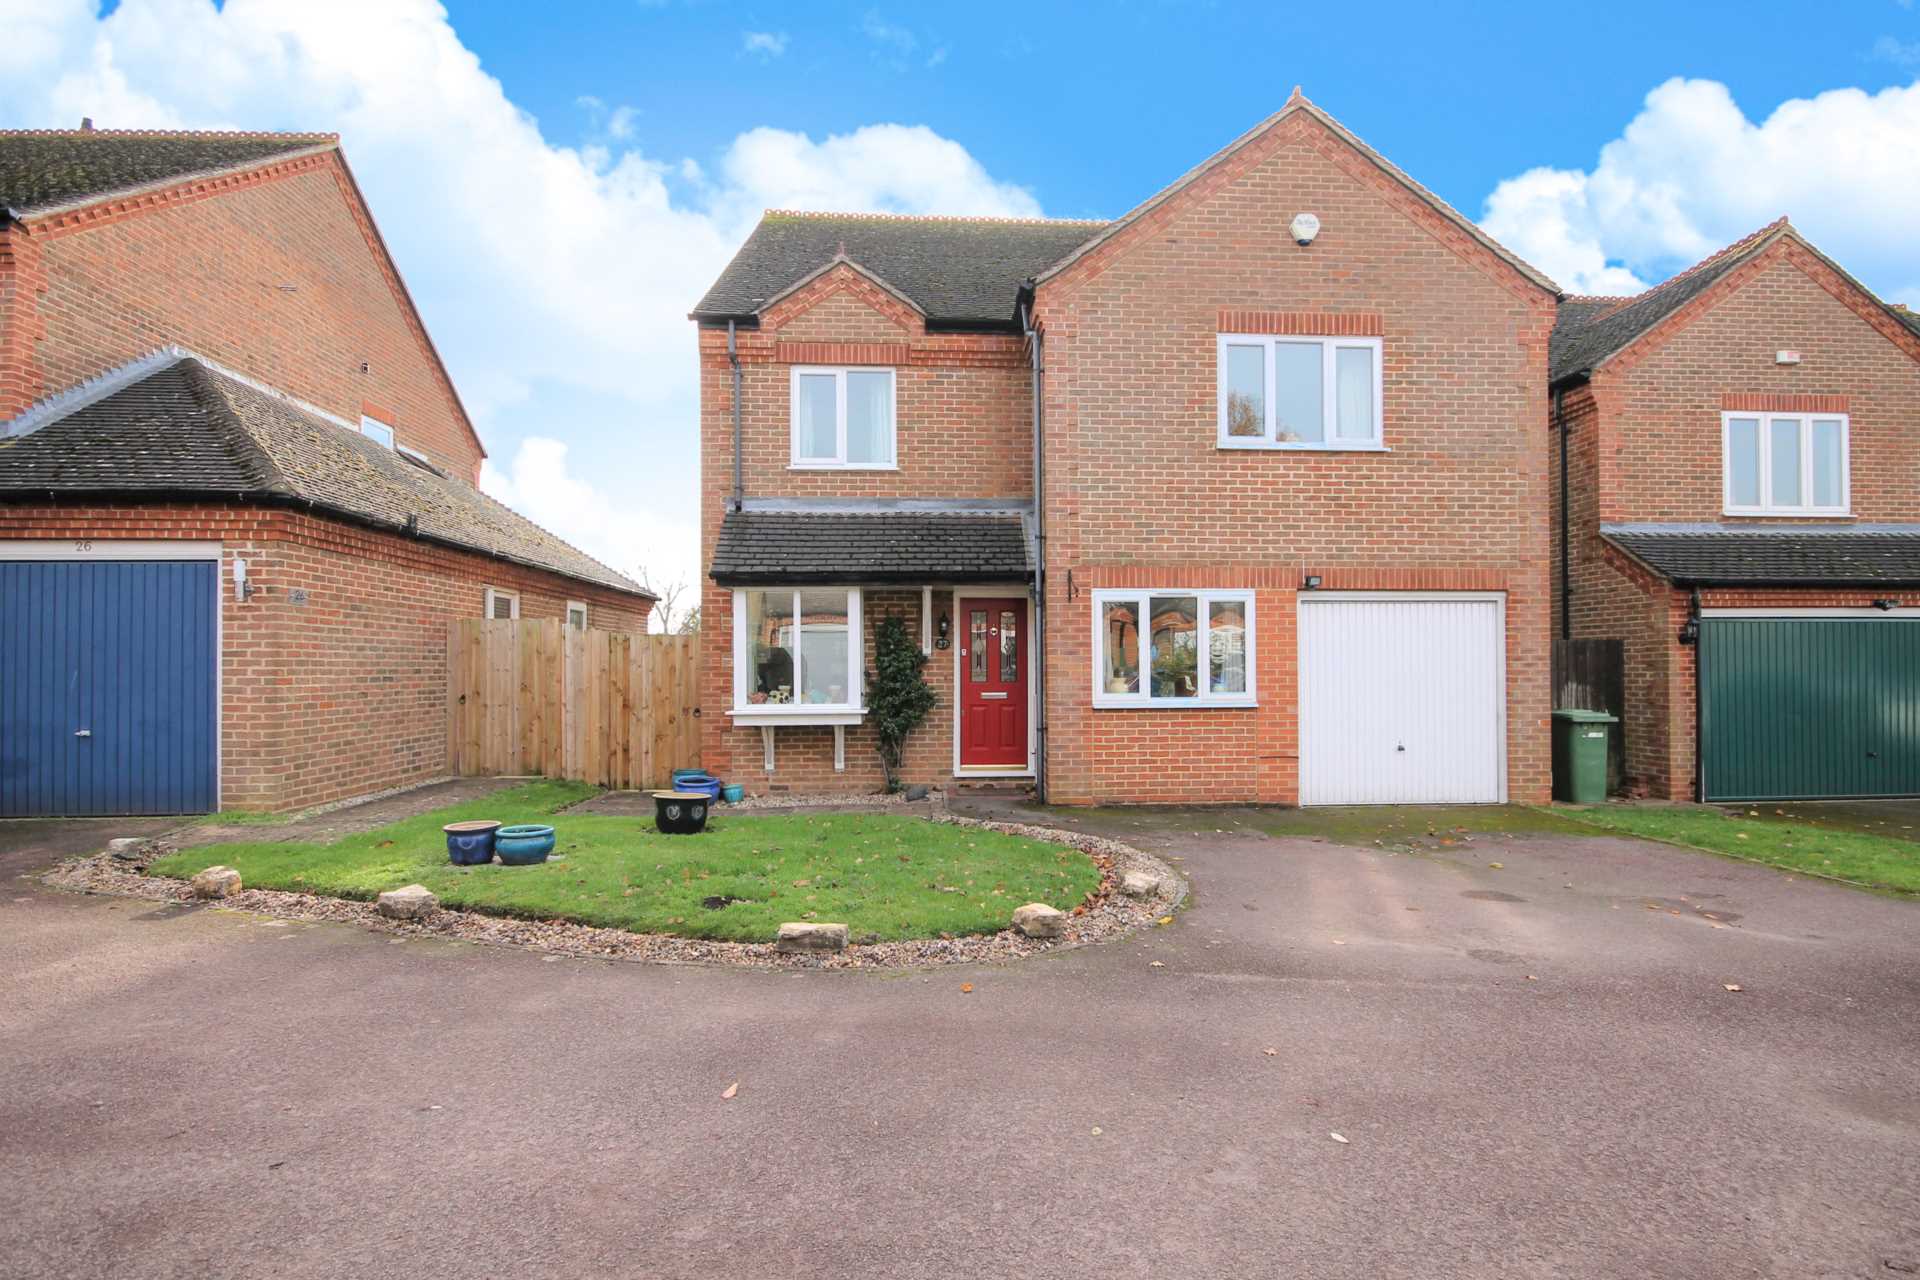 4 bed Detached House for rent in Bracknell. From Sears Property - Bracknell